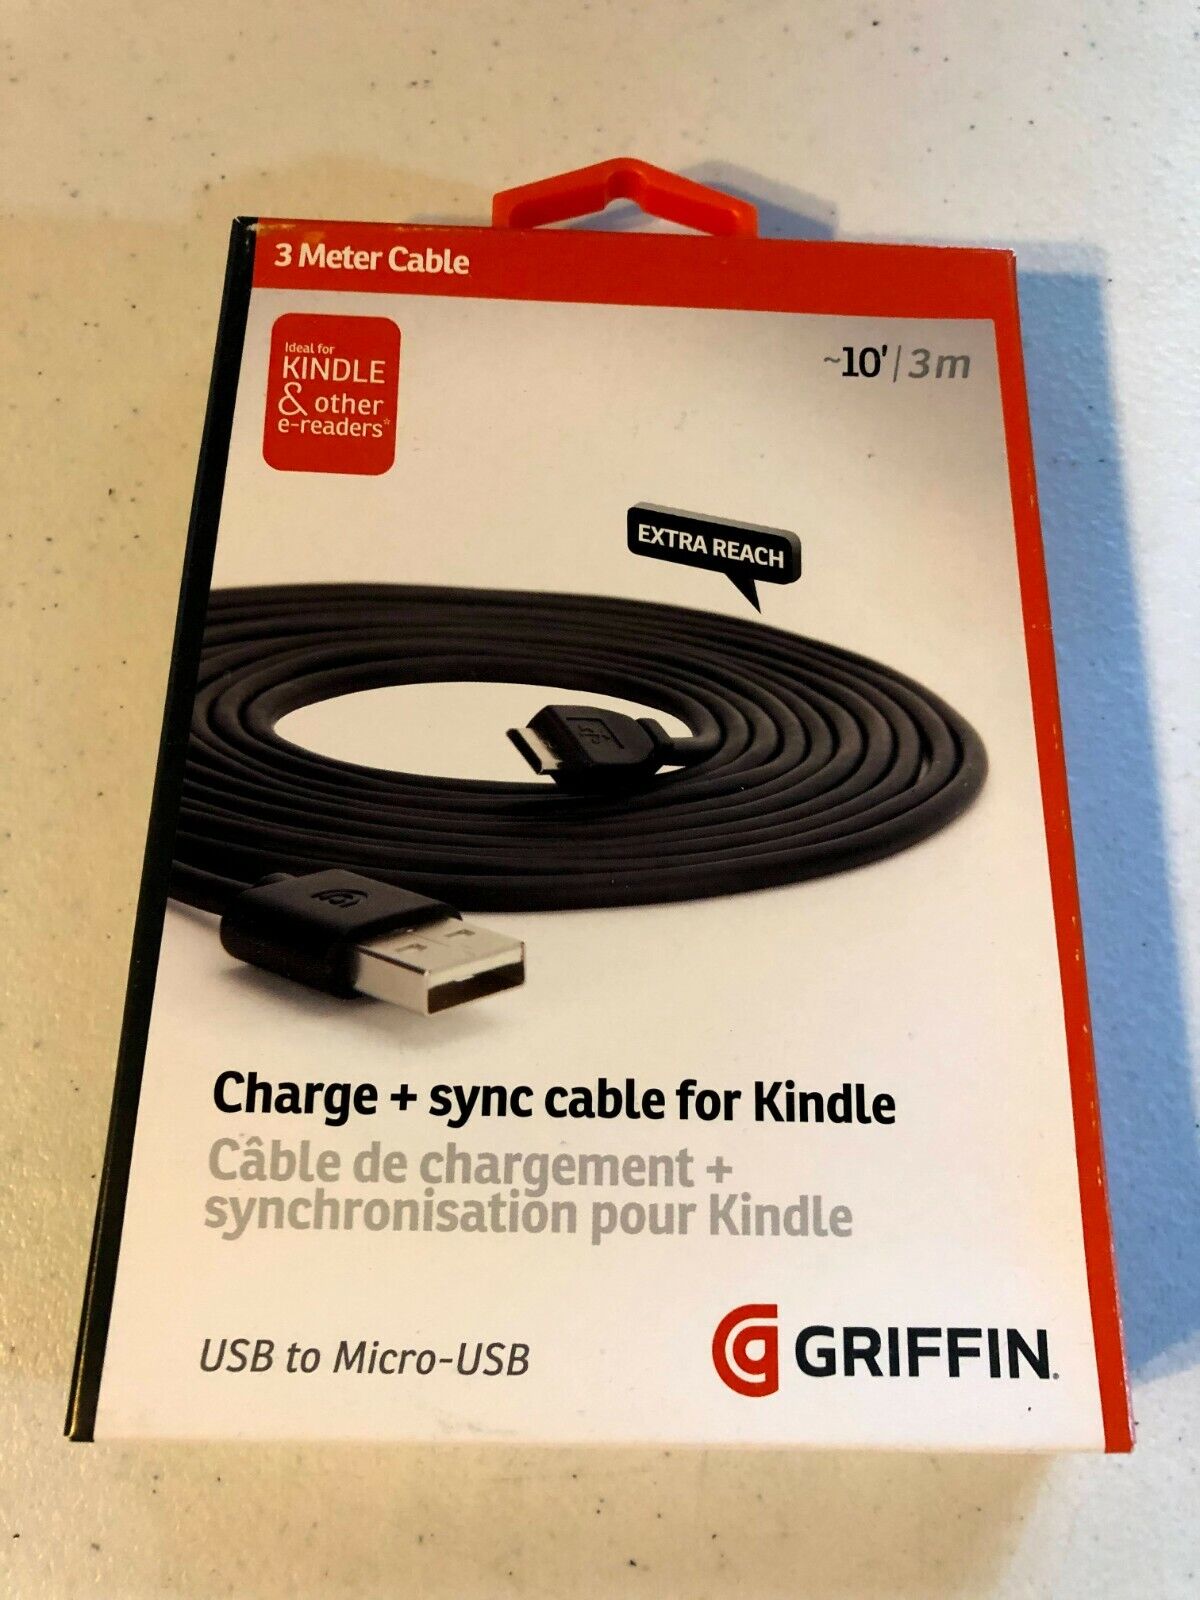 New - Sealed - Griffin Technology 10 foot Charge & Sync Cable for Kindle - Black